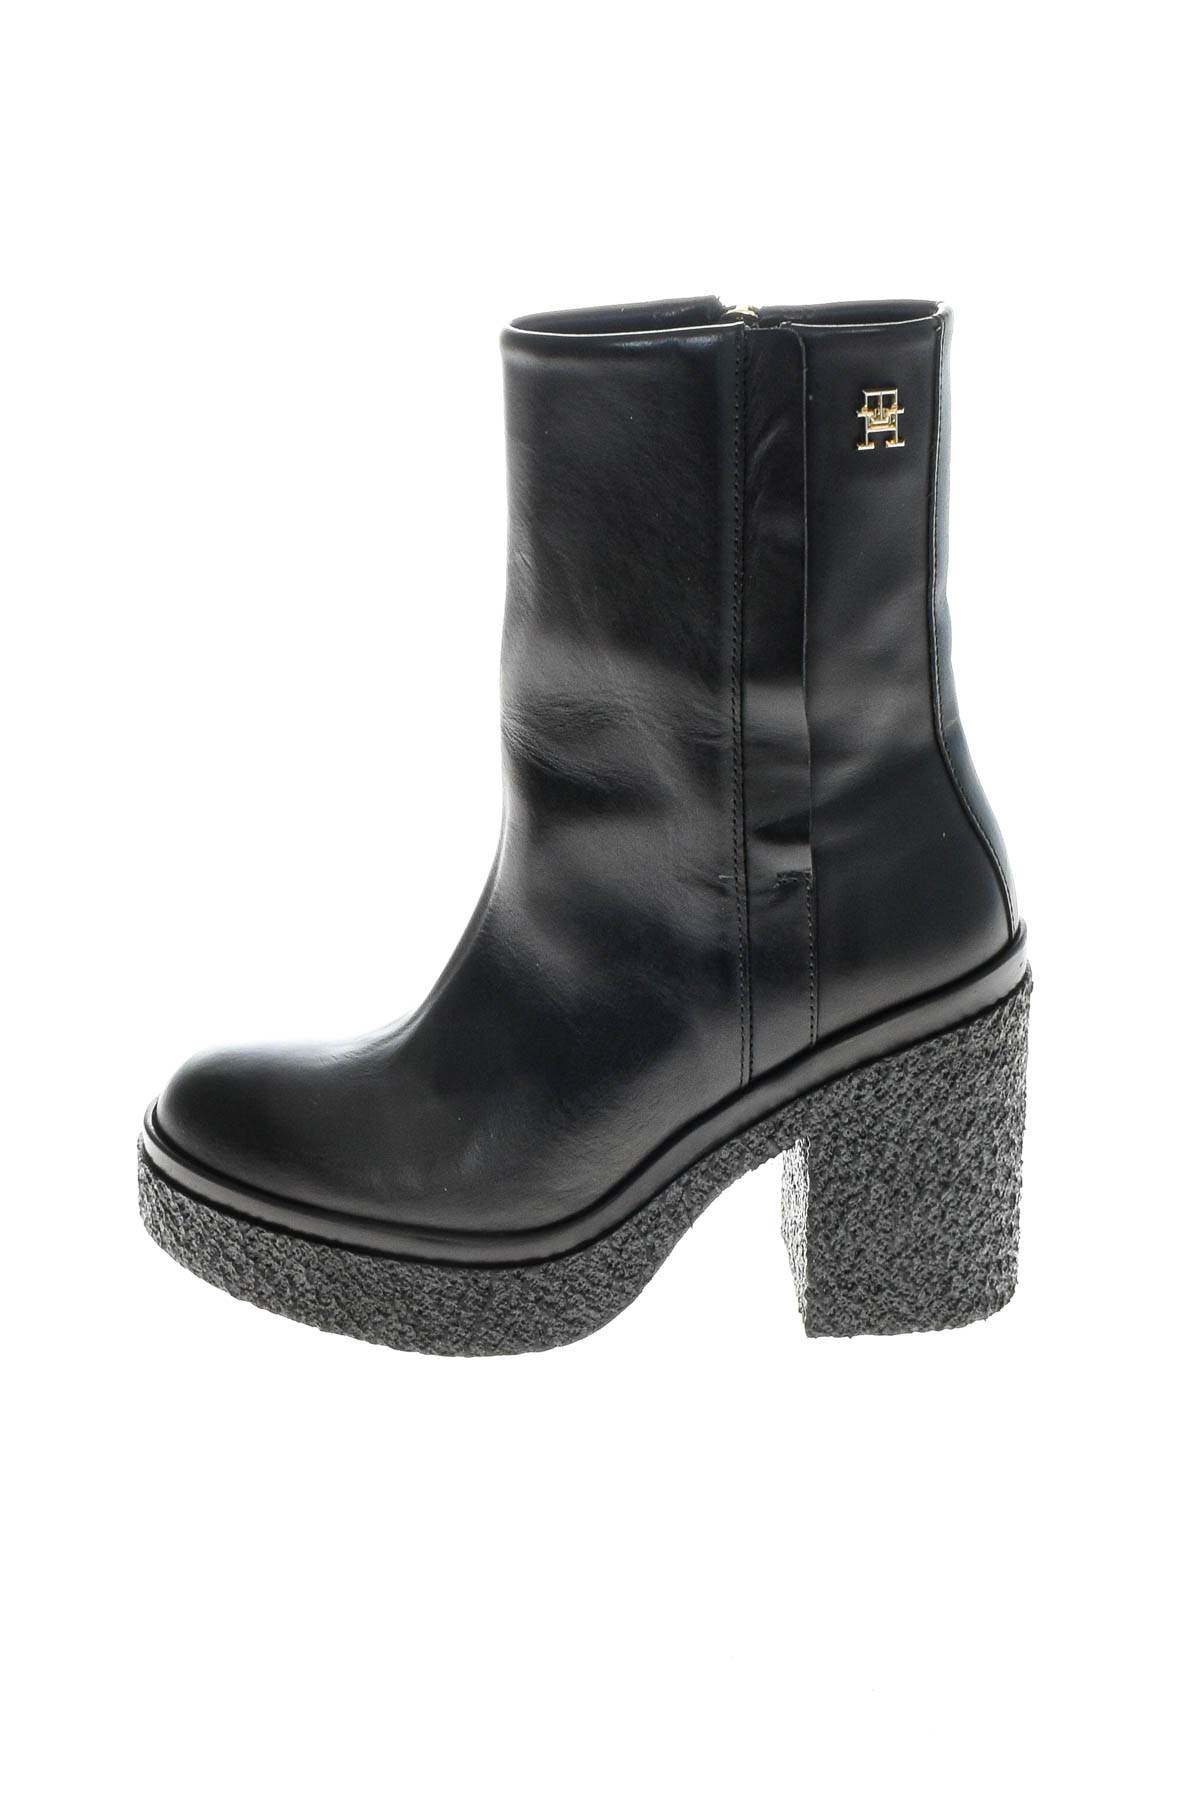 Women's boots - TOMMY HILFIGER - 0